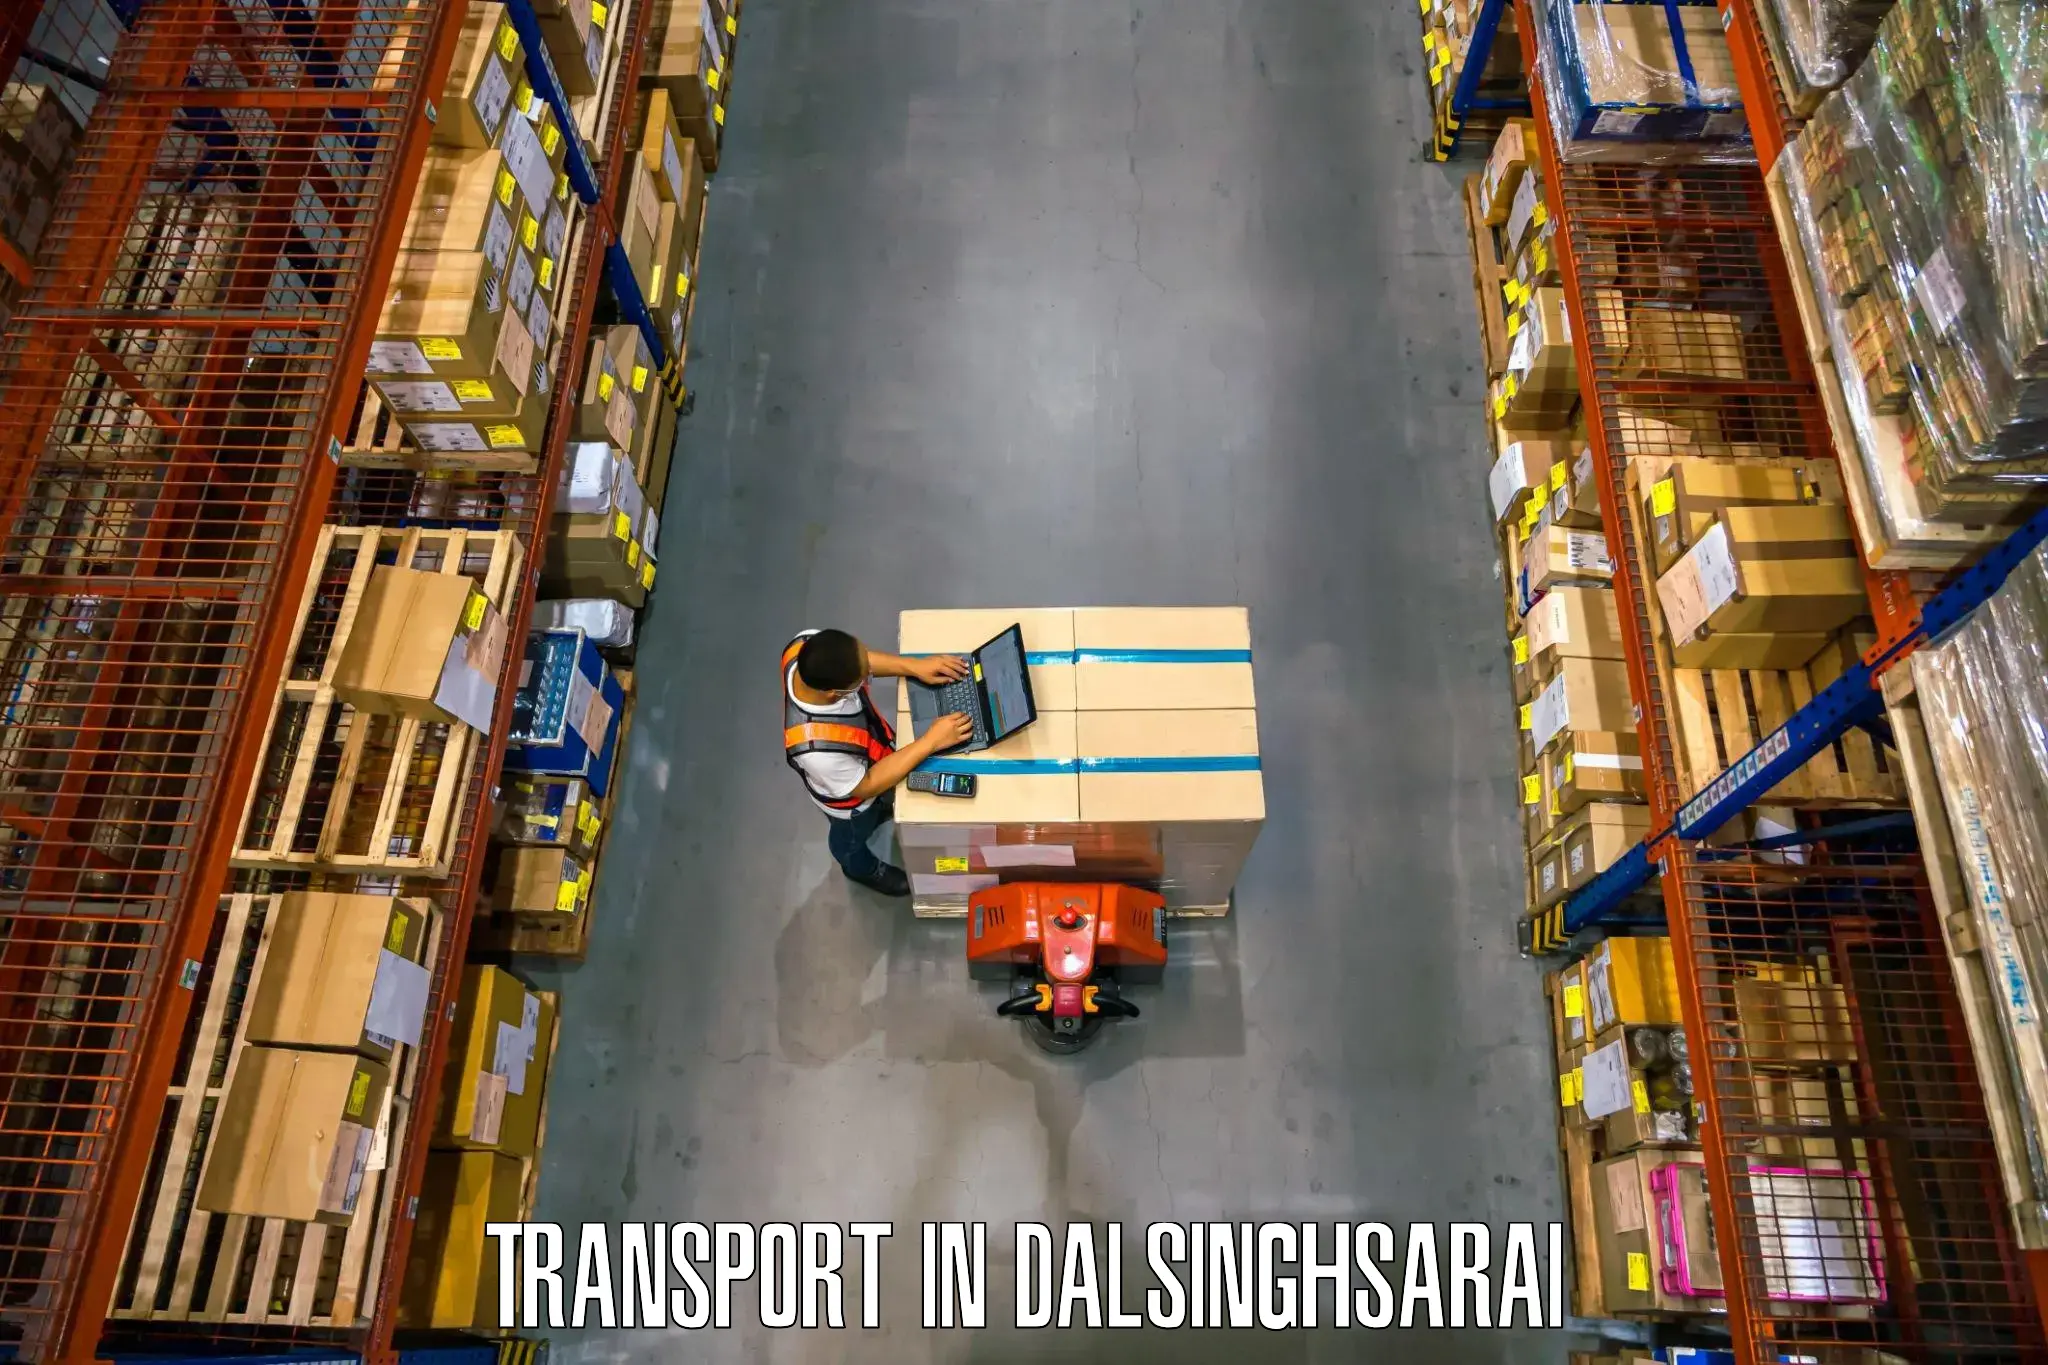 Express transport services in Dalsinghsarai